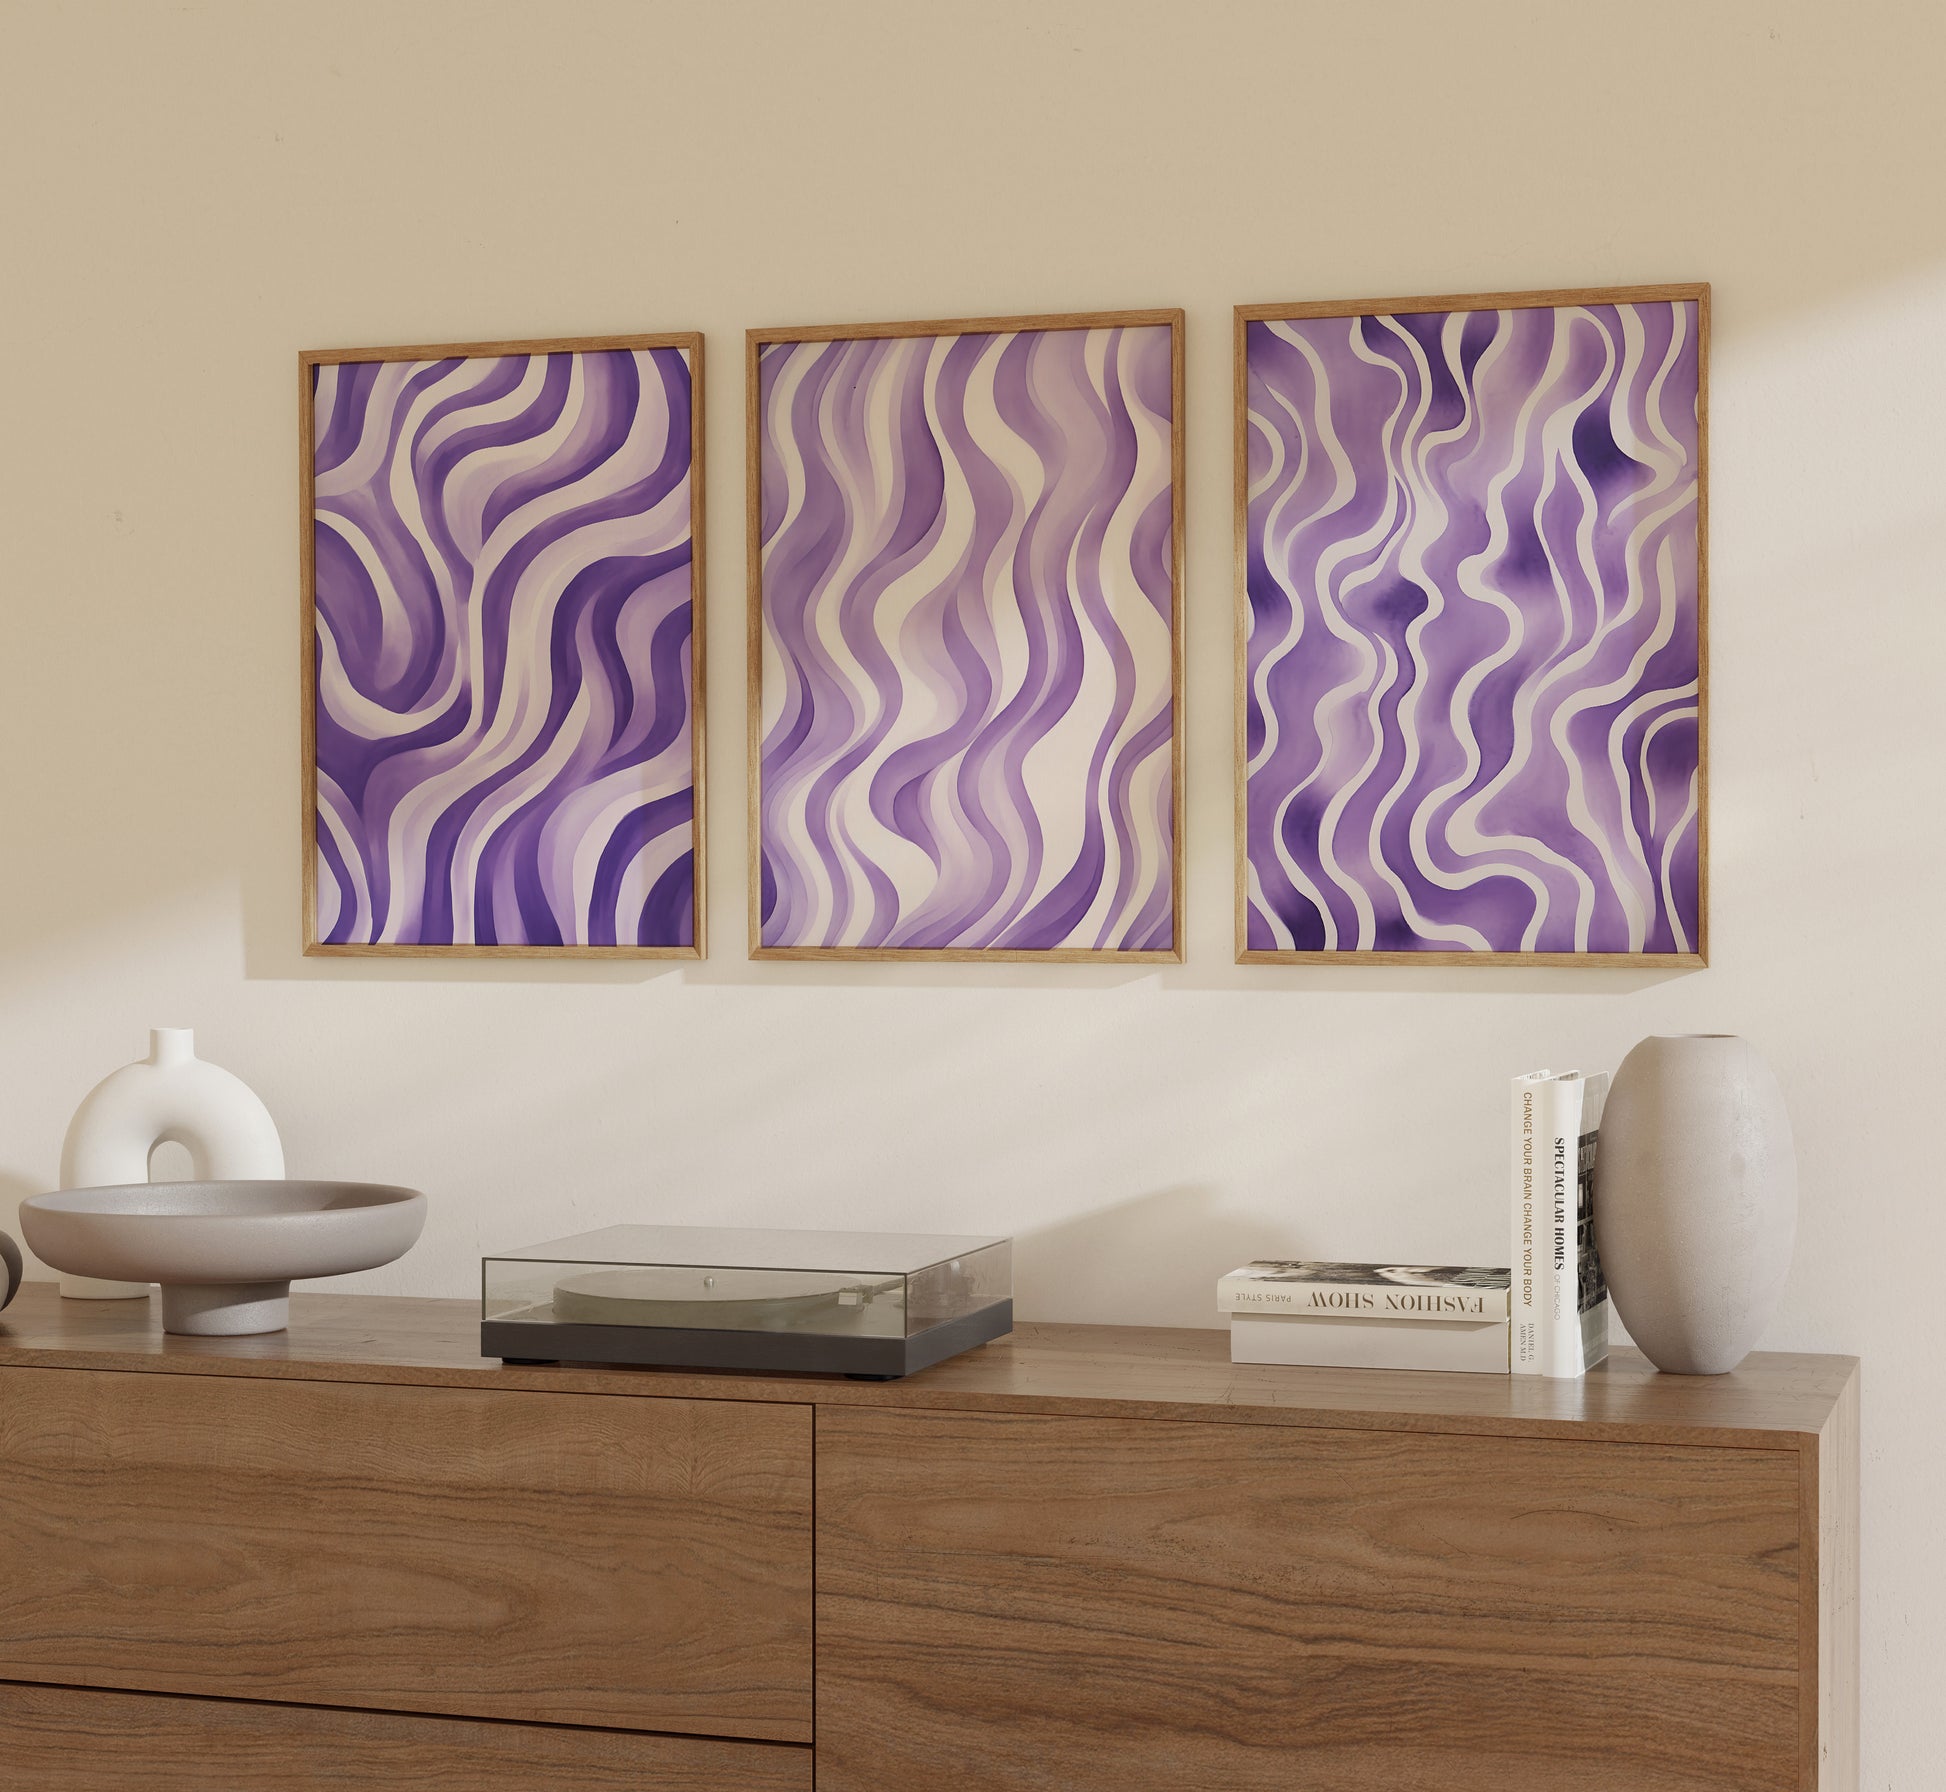 Three framed abstract purple wavy patterns on a wall above a wooden sideboard.